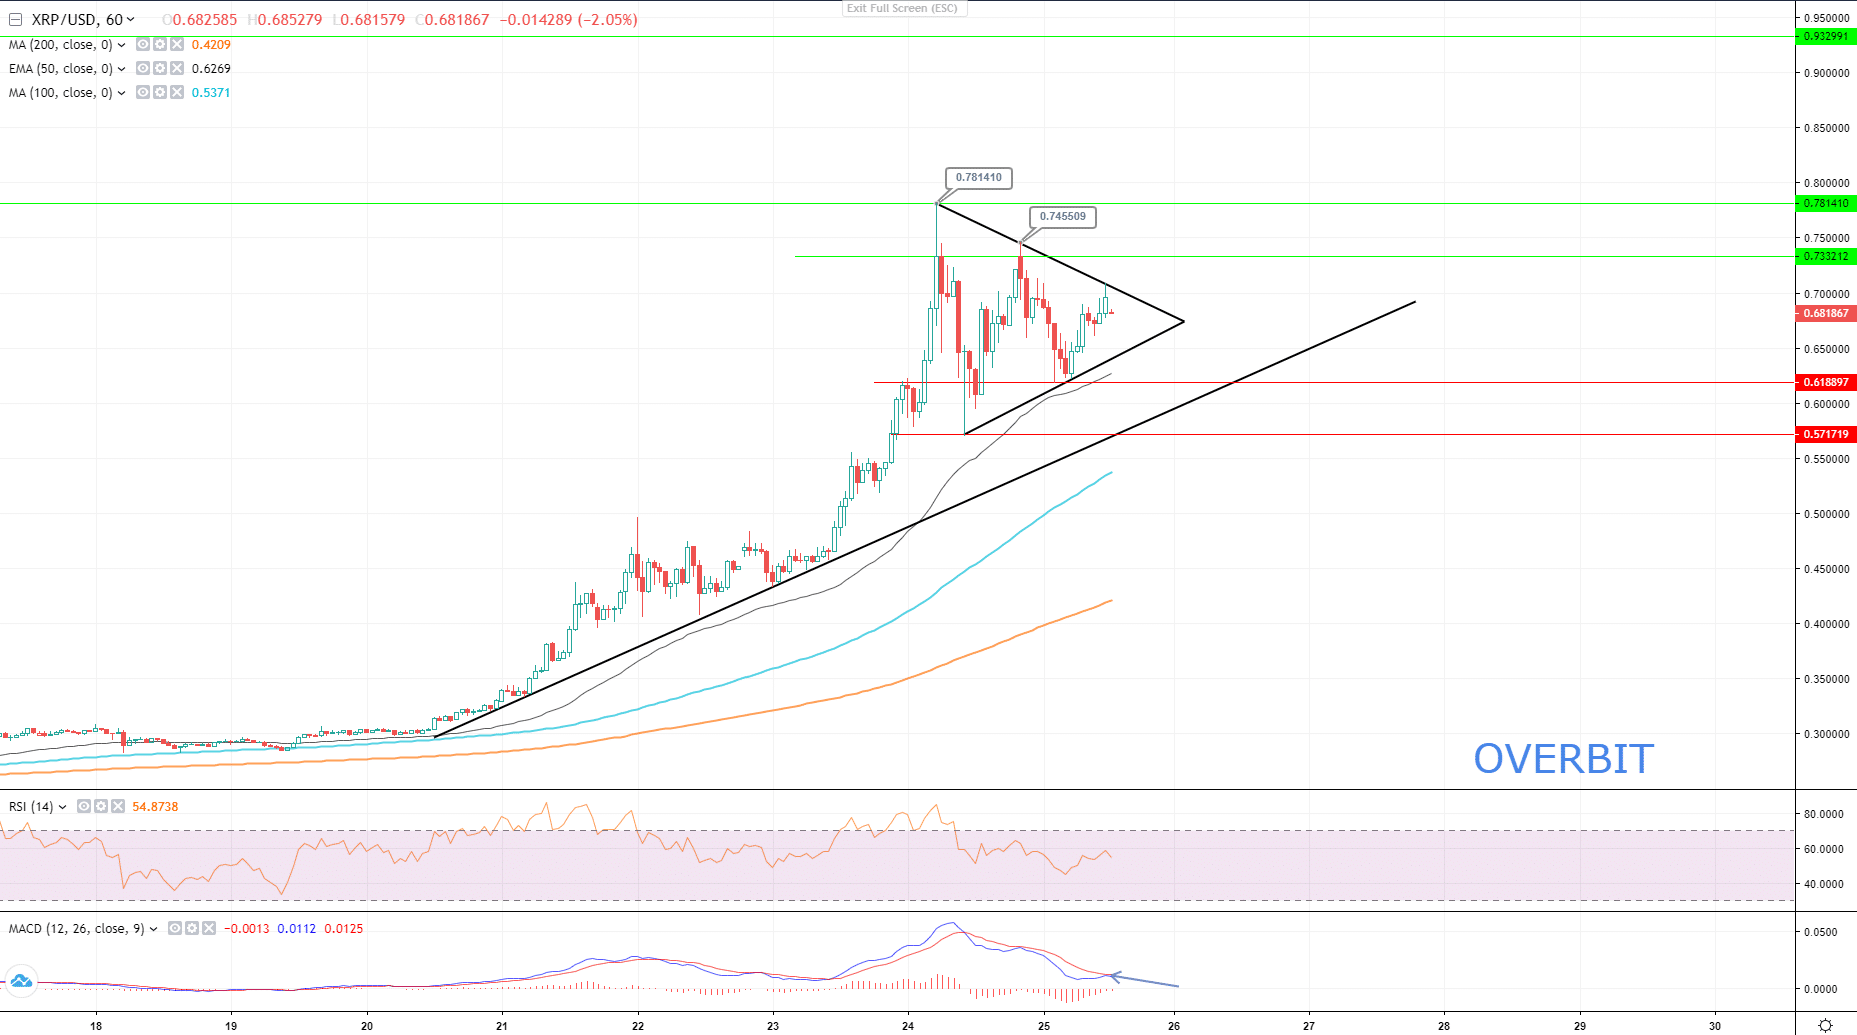 Watch These Two Alts Closely: ETH and XRP Analysis